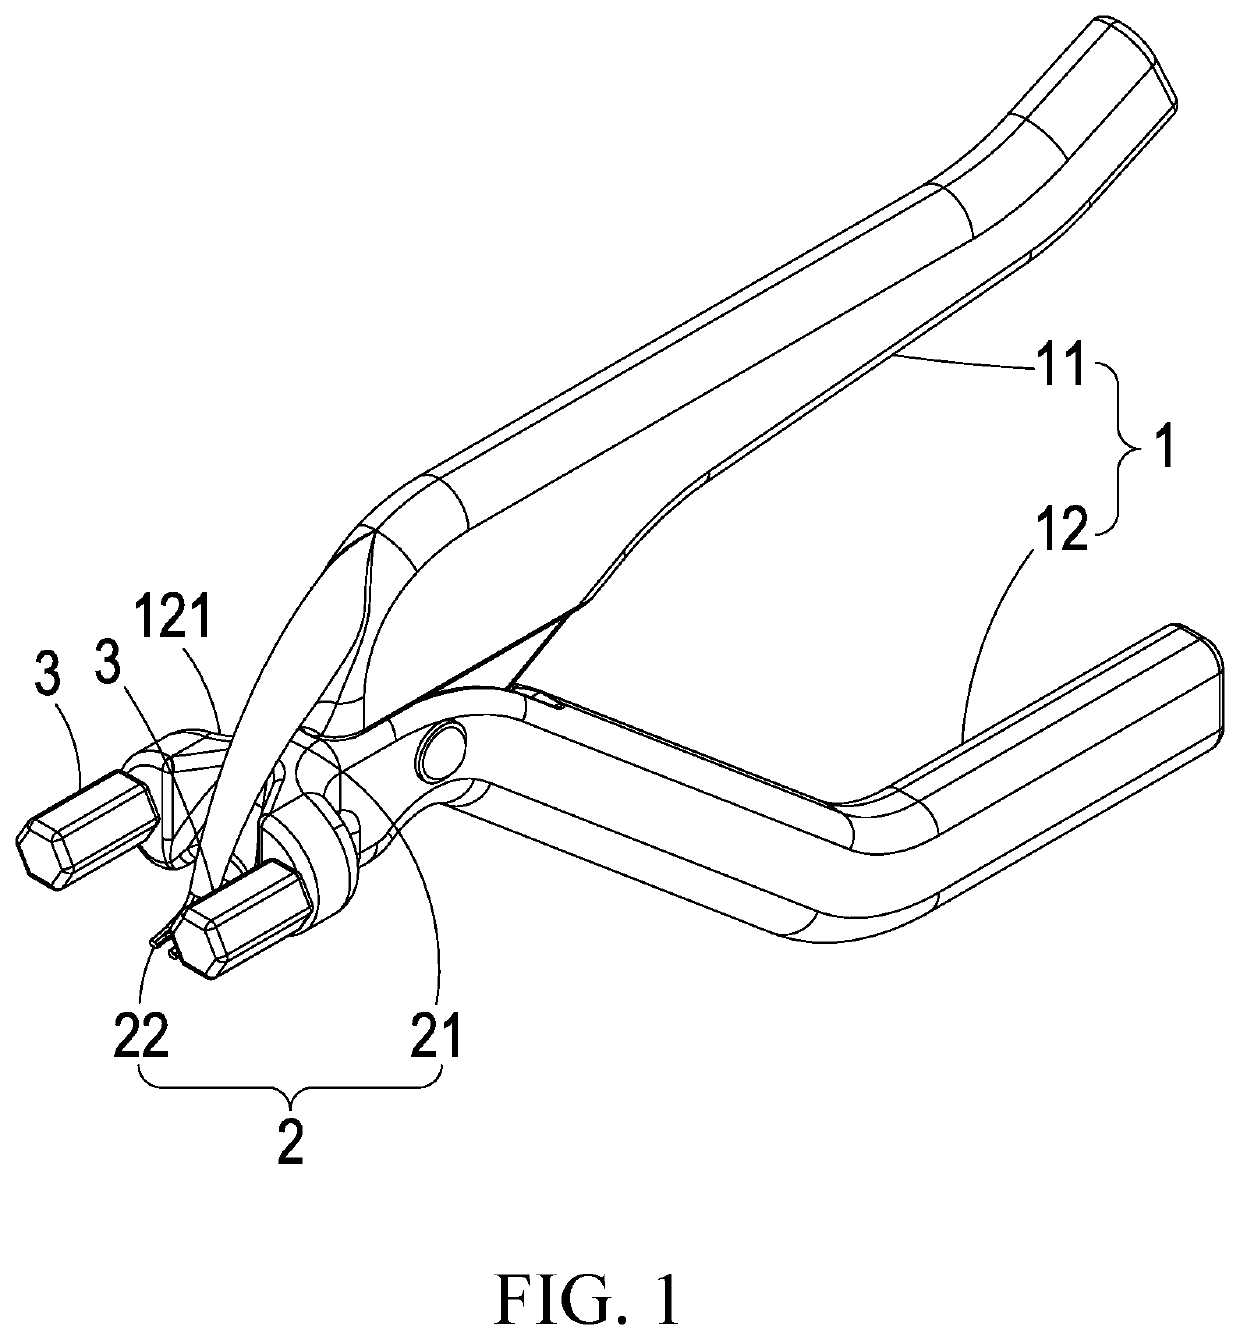 Dental extraction device